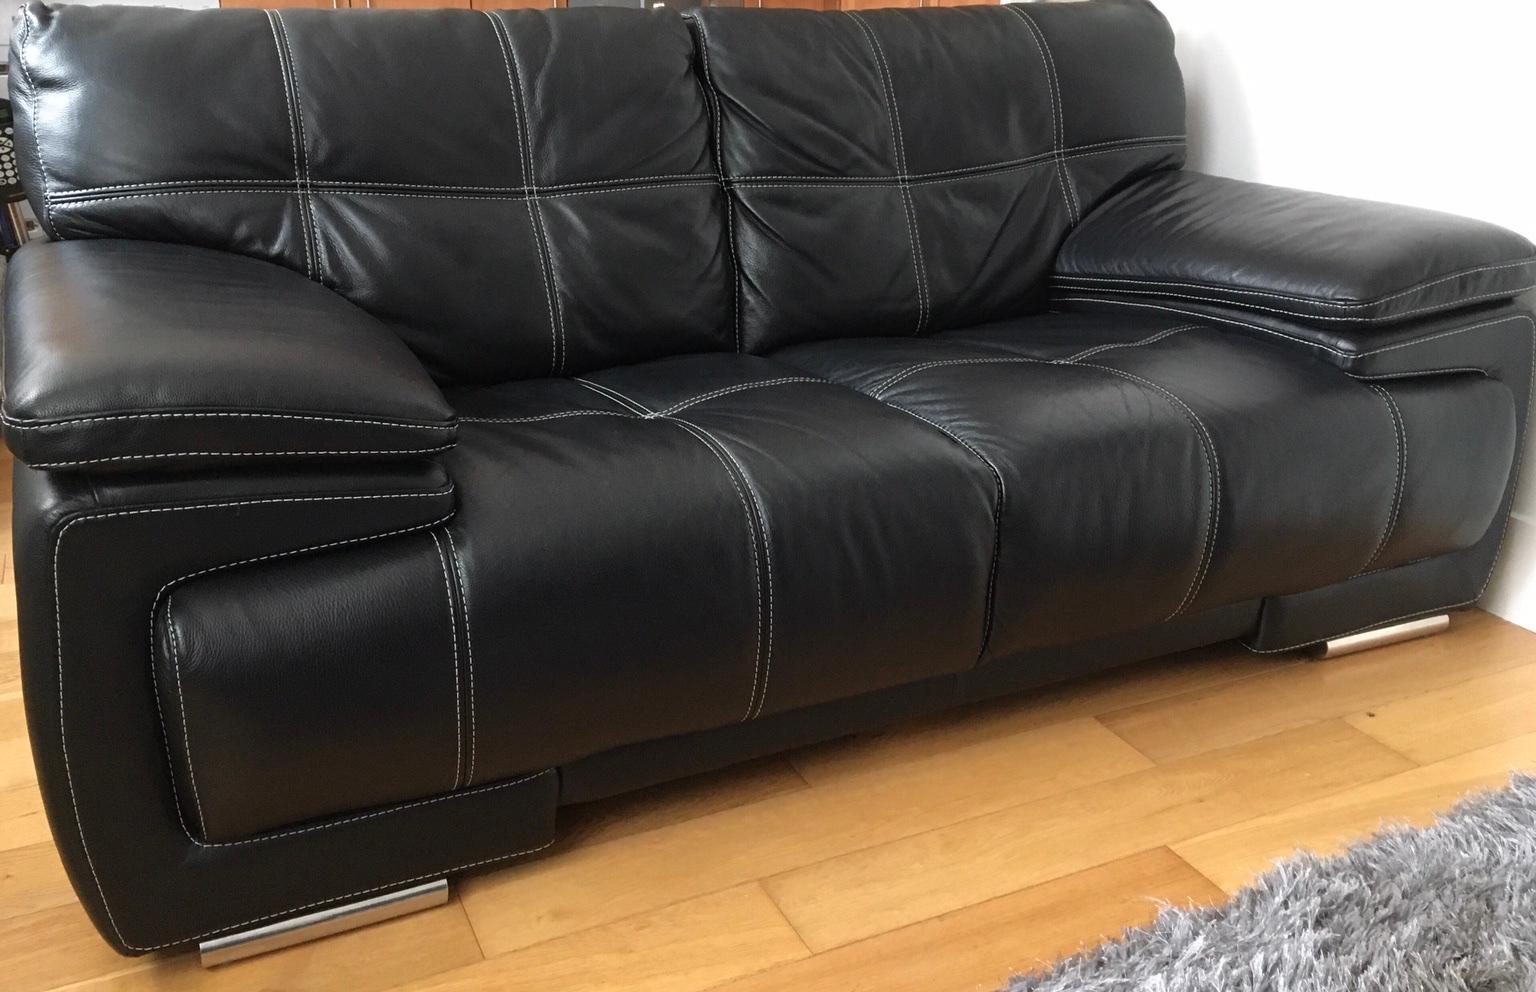 Sofology Leather Sofa In L20 Wirral For, Violino Leather Furniture Reviews